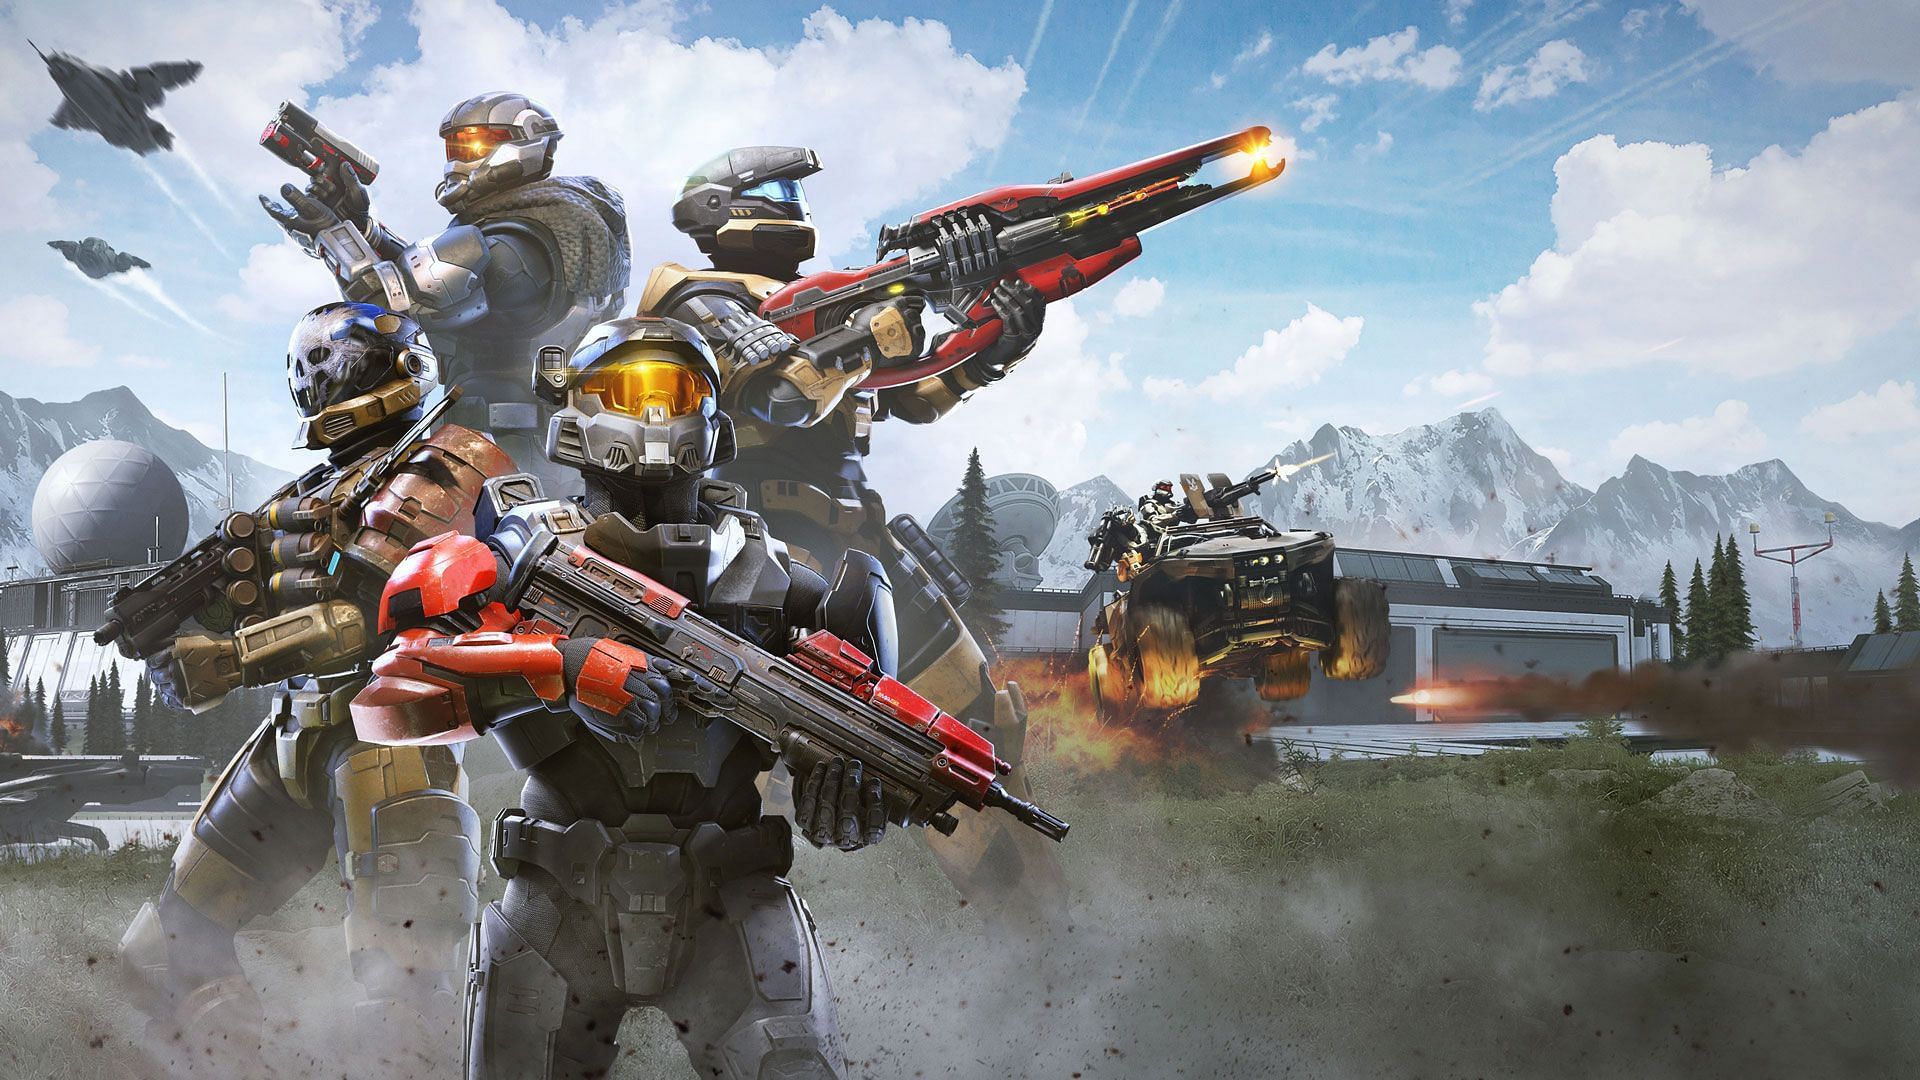 Halo is back on the menu, boys (Image by Microsoft)